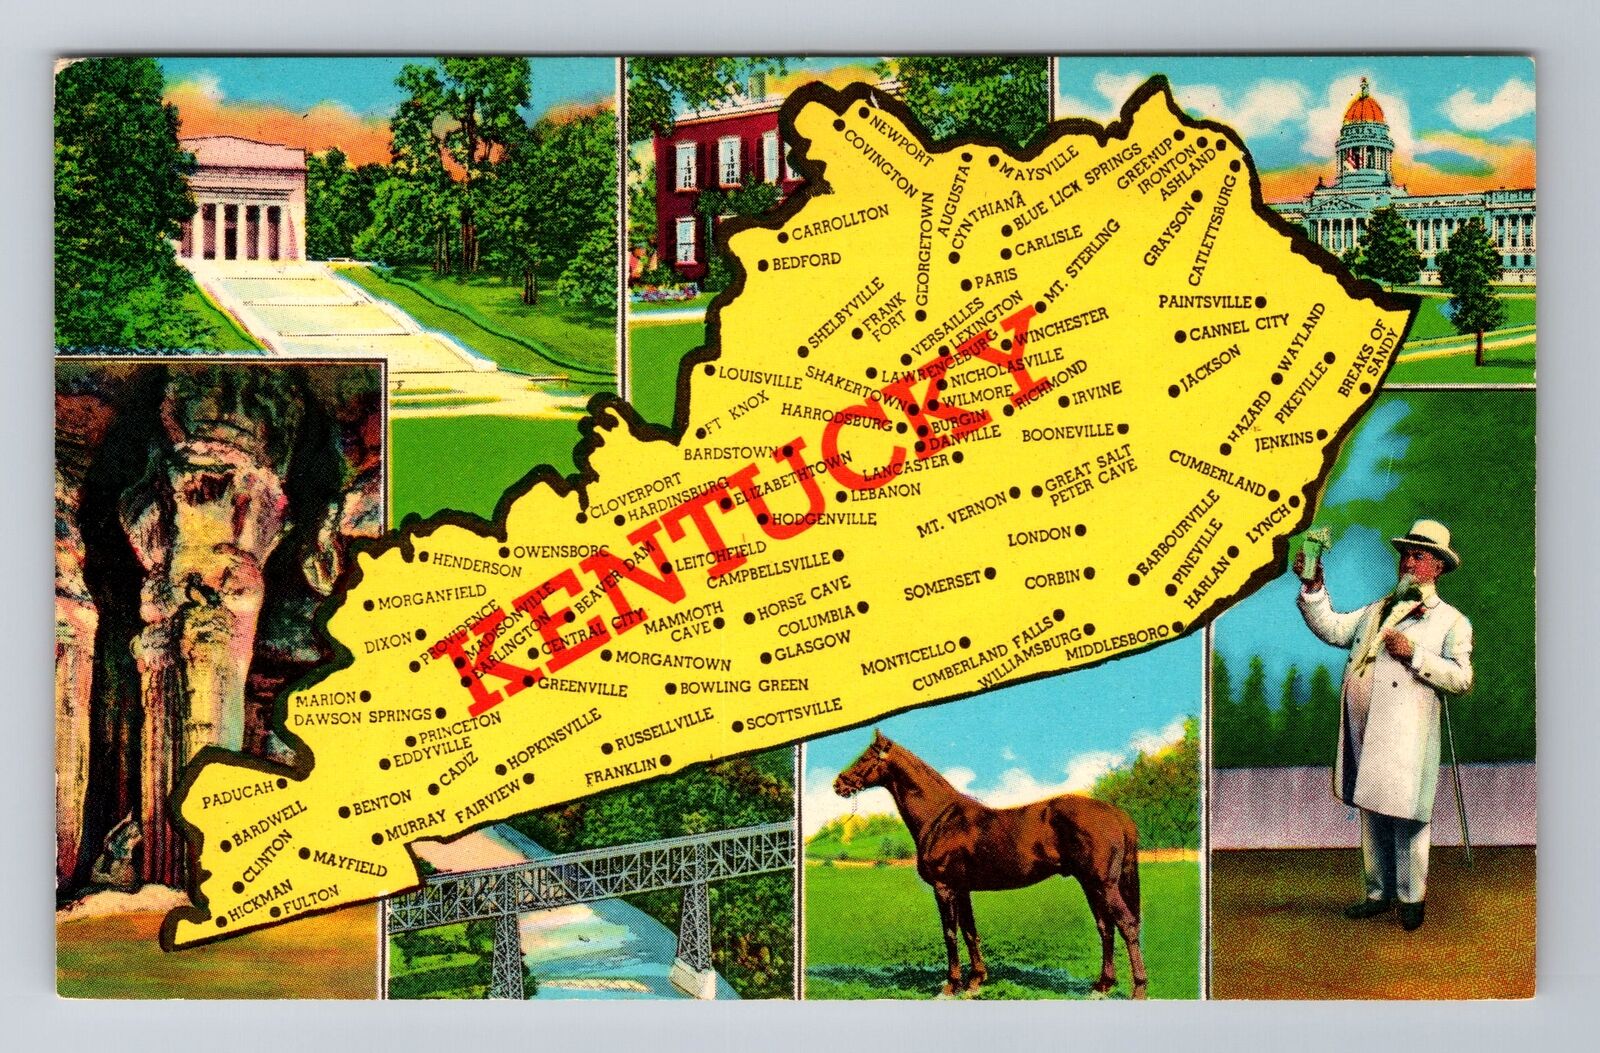 KY-Kentucky, View Of Map And Landmarks, Antique, Vintage Souvenir Postcard